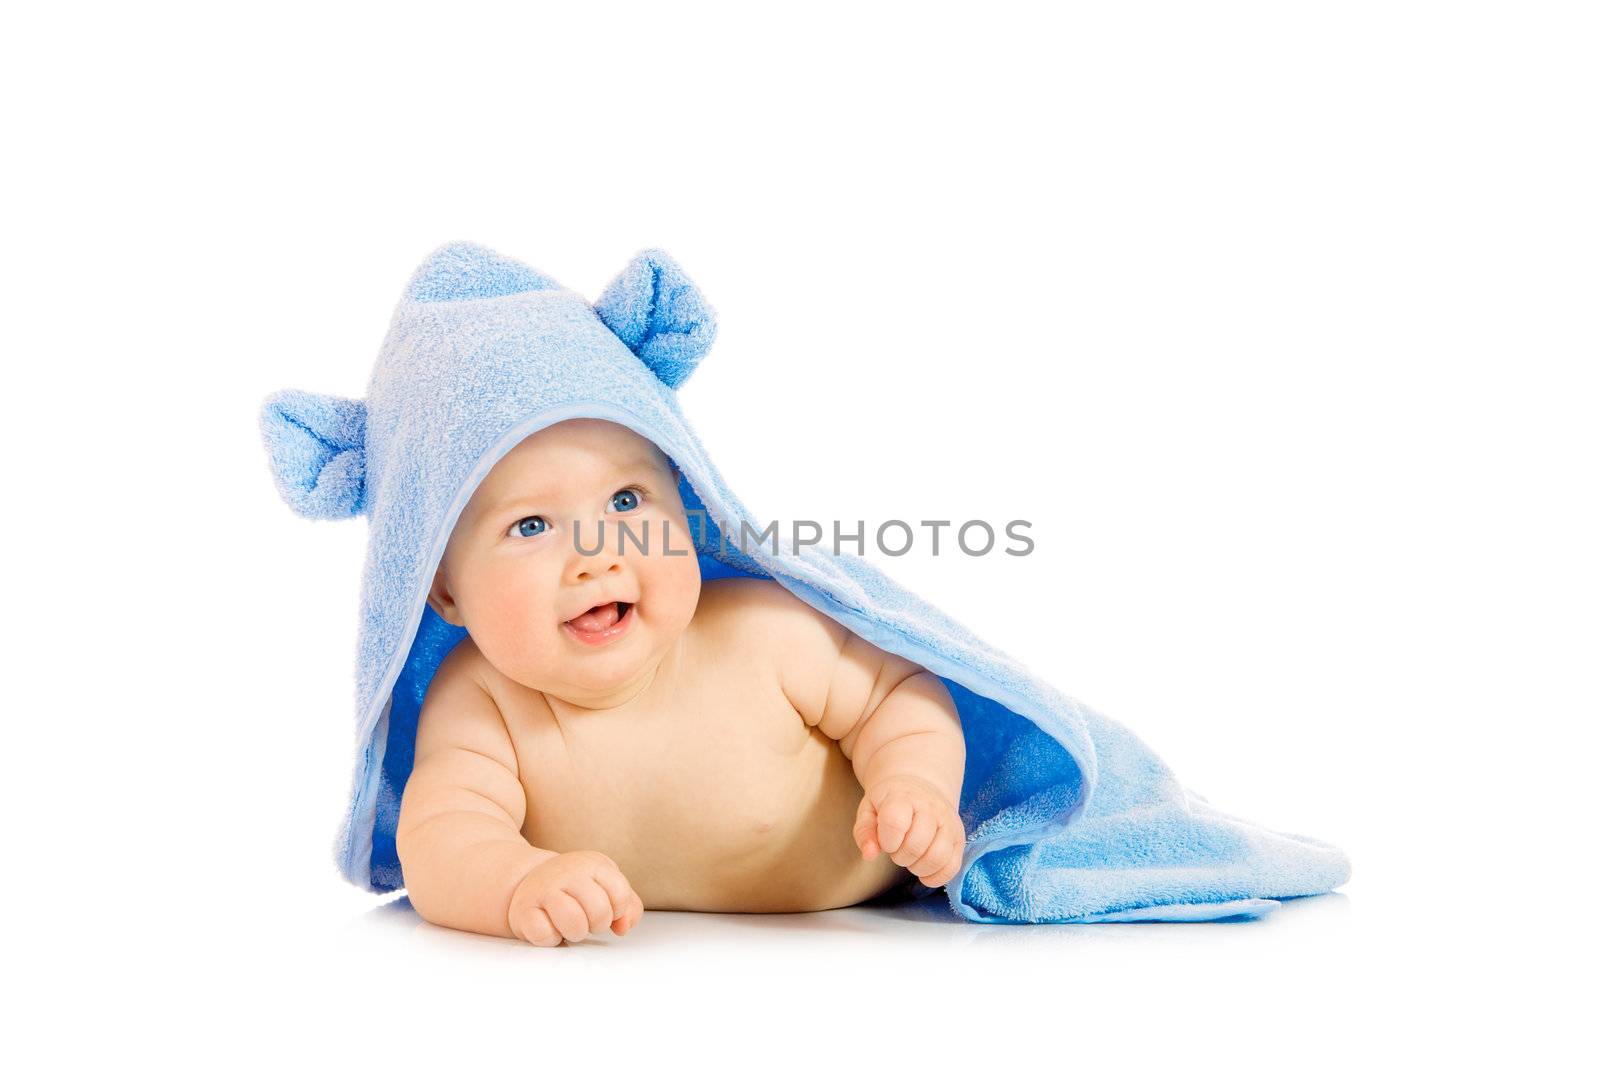 Small smiling baby with a towel